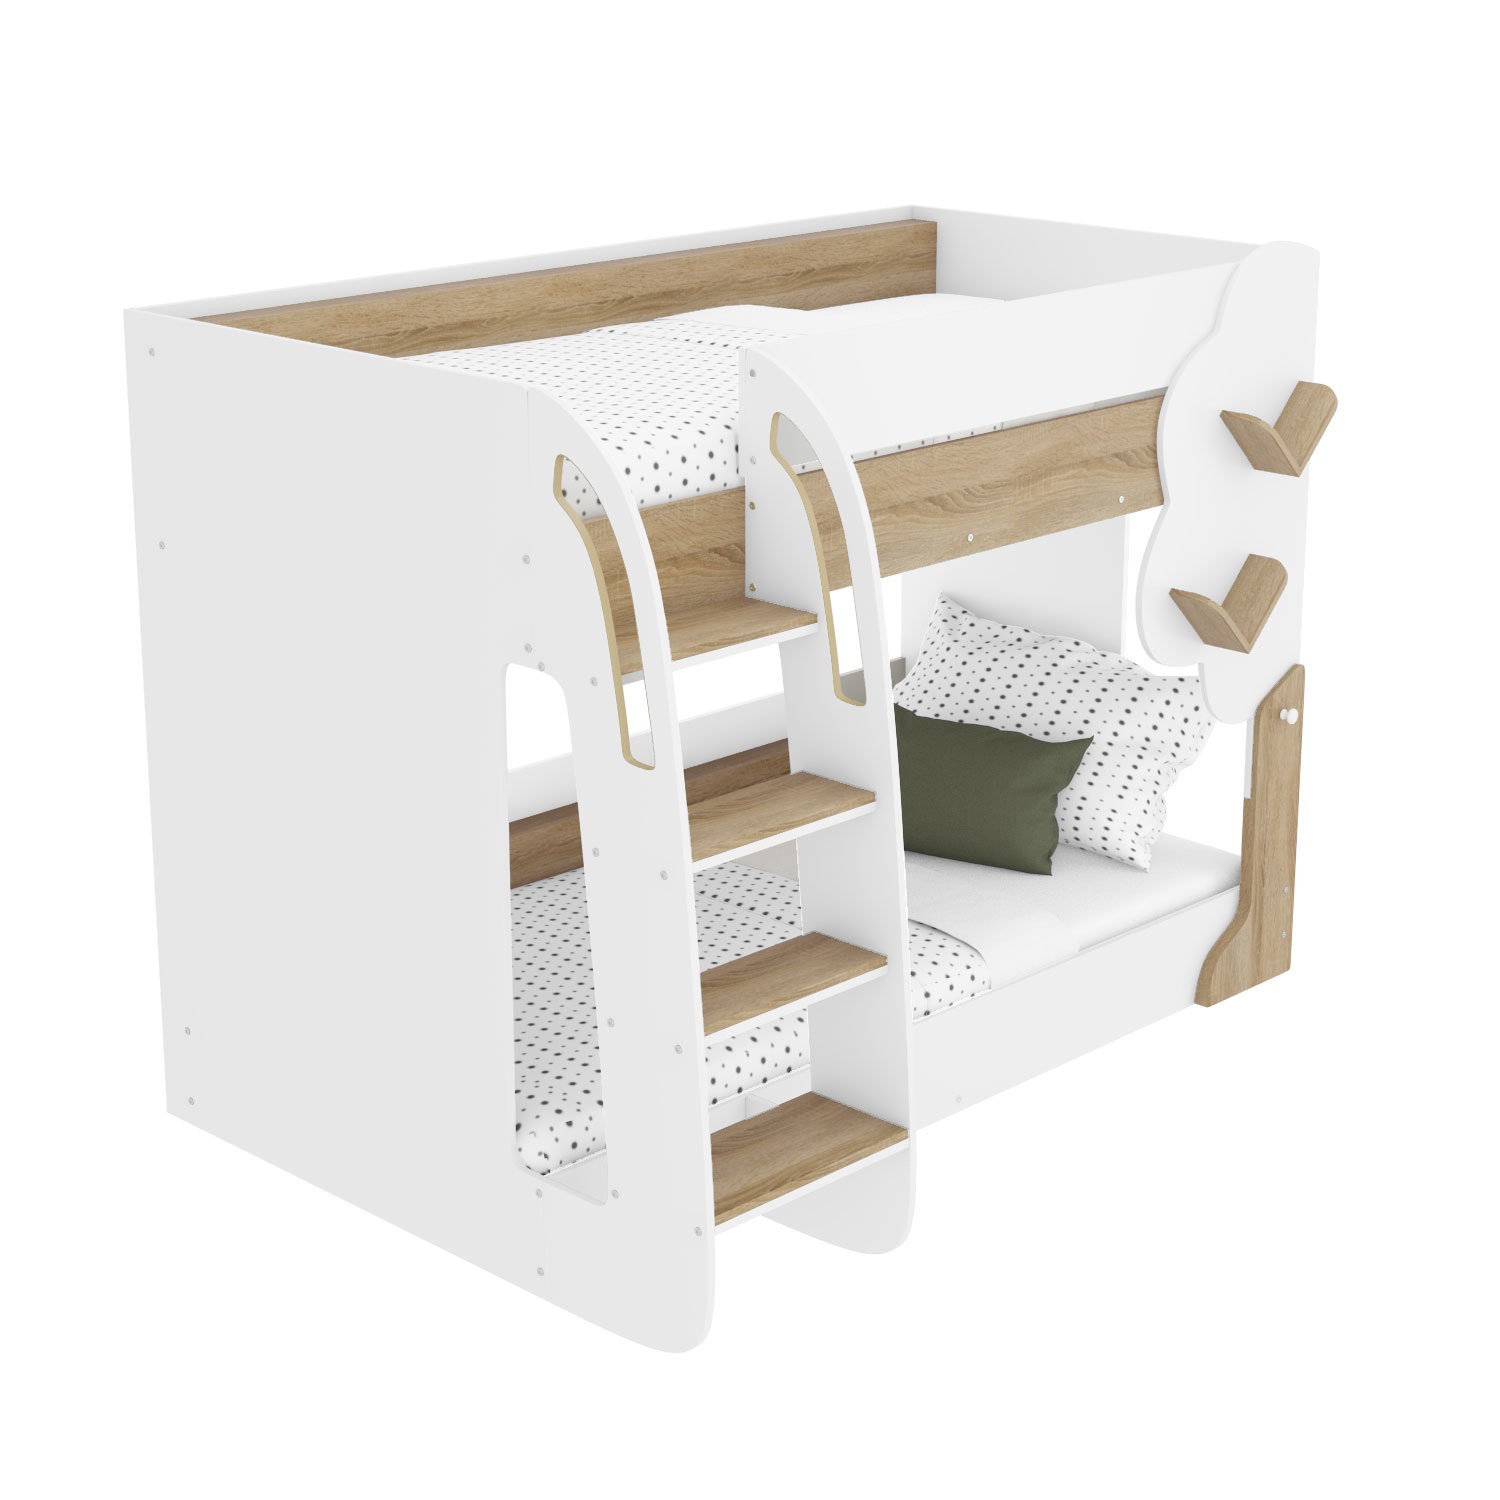 Hadley Bunk Bed In White And Oak With, Bunk Beds York Pa